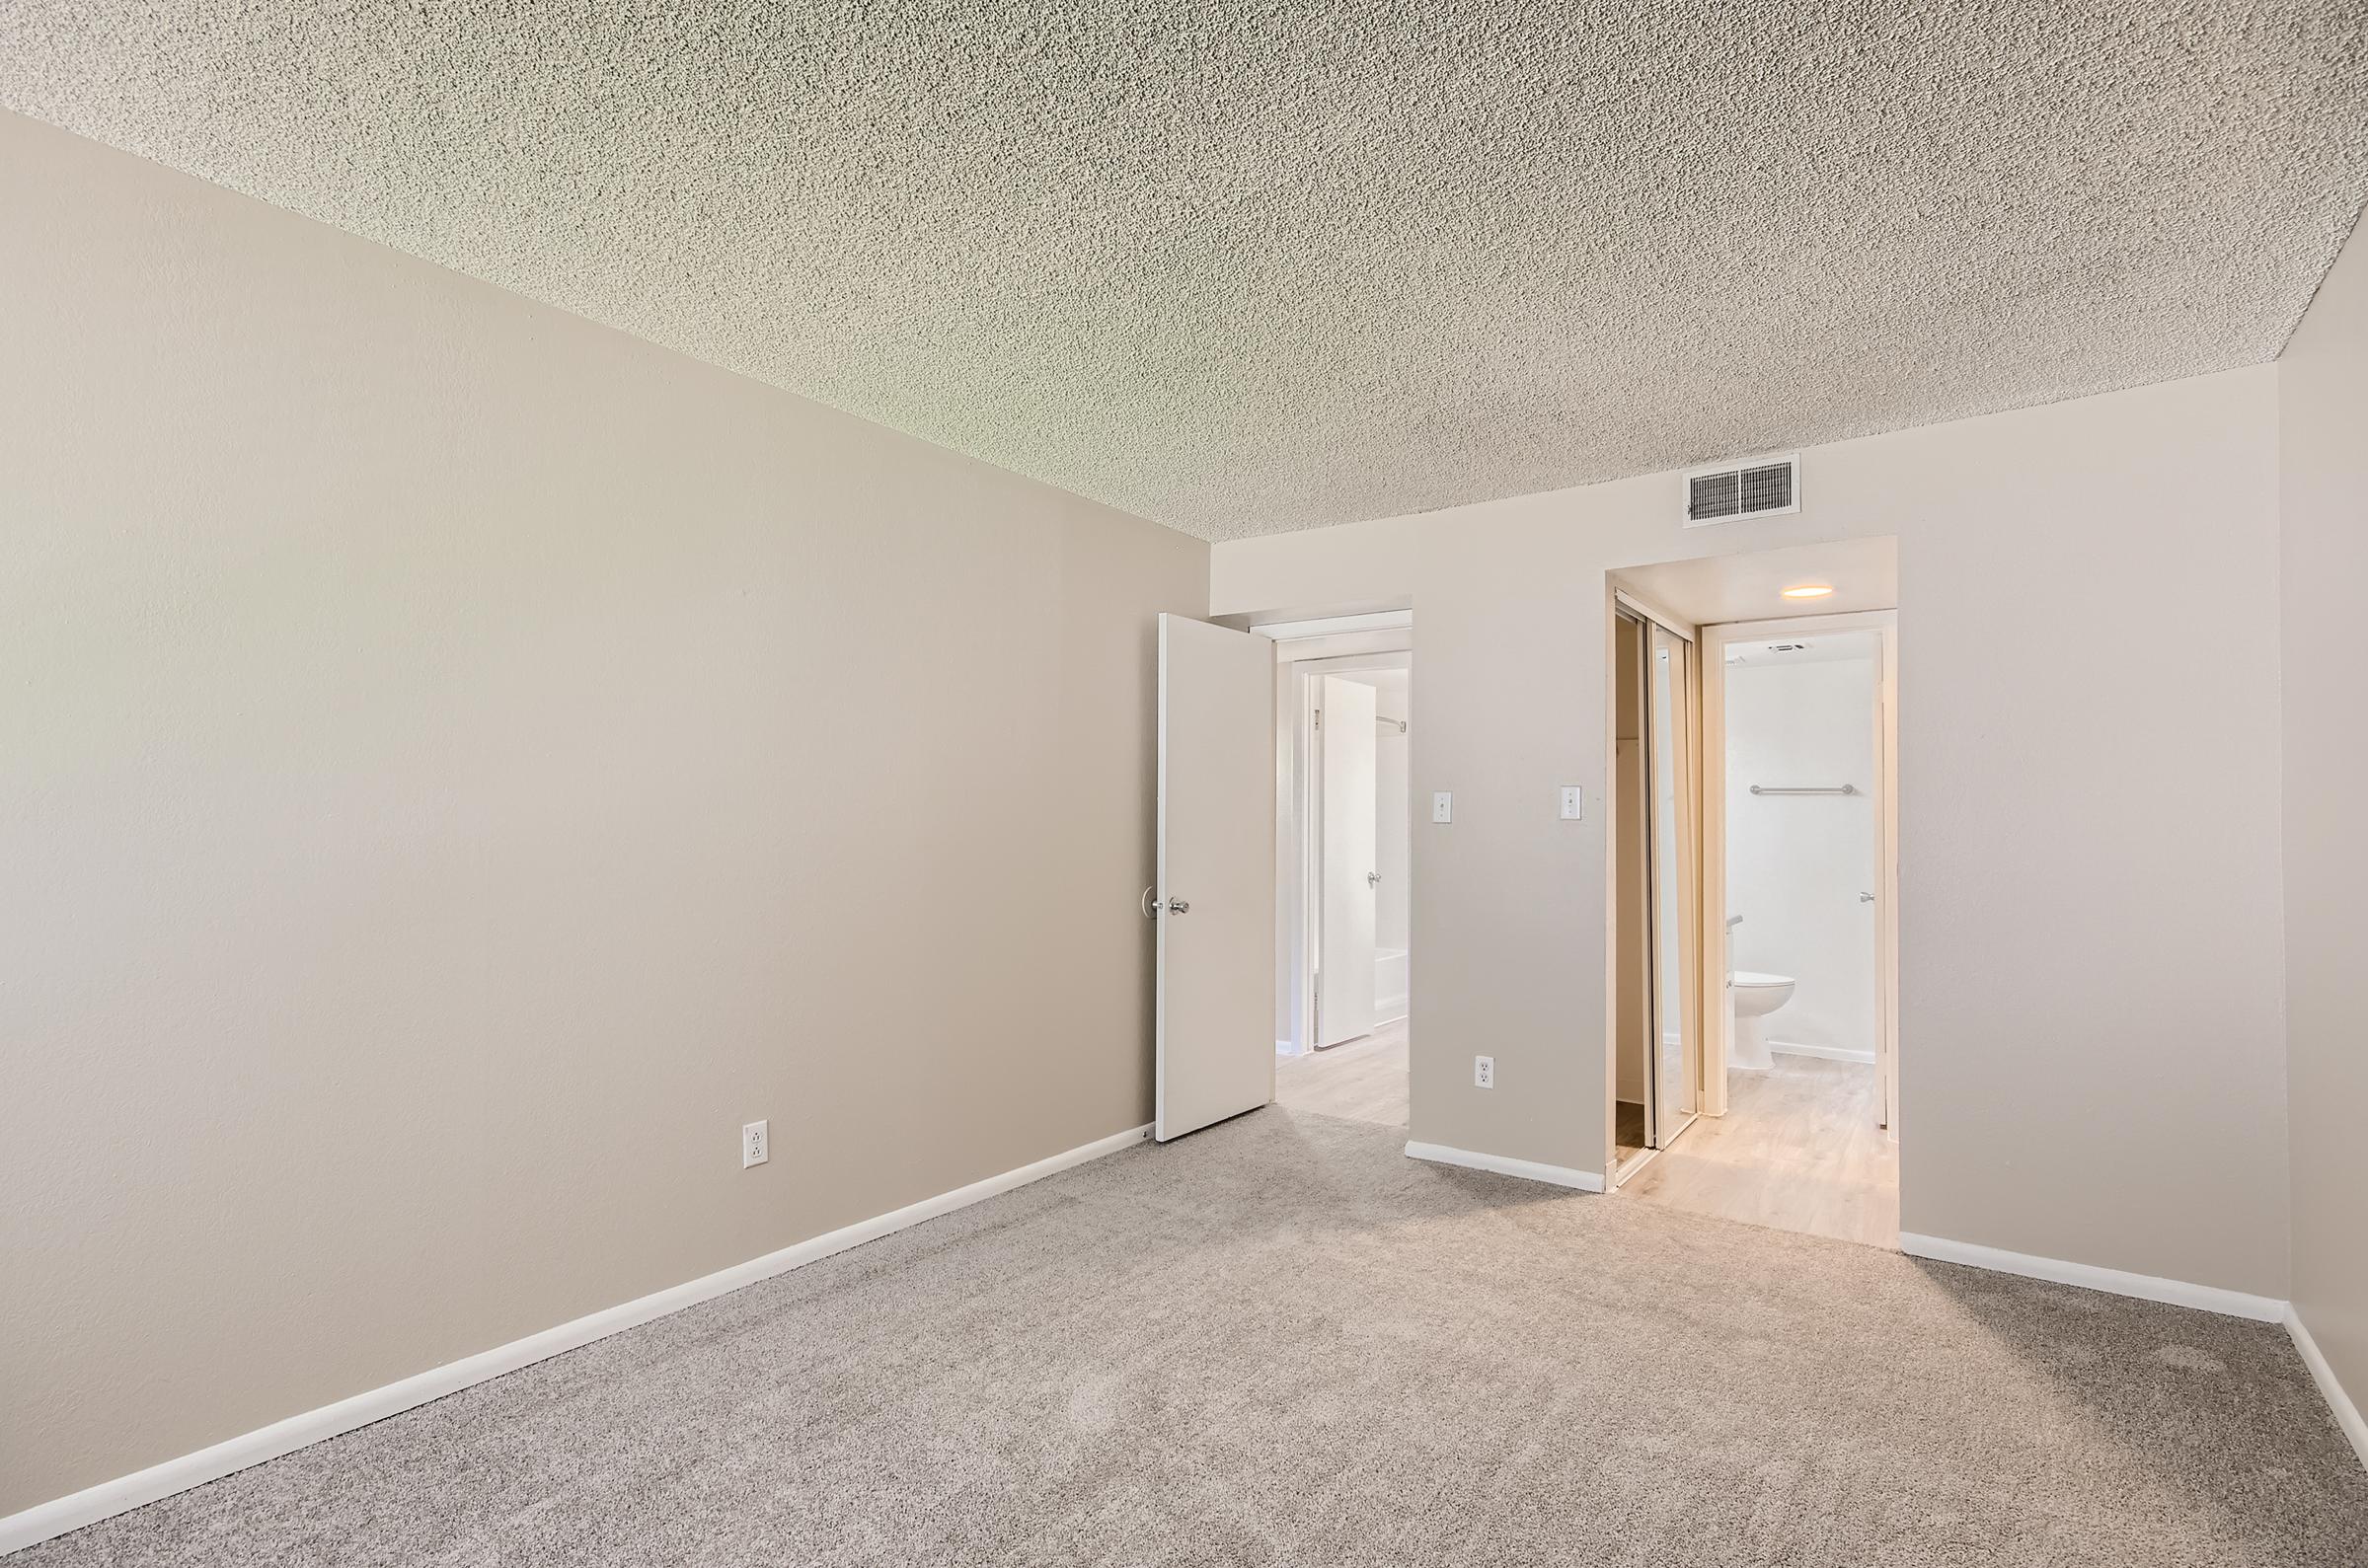 A carpeted bedroom near the kitchen with an en-suite bathroom at Rise on McClintock.